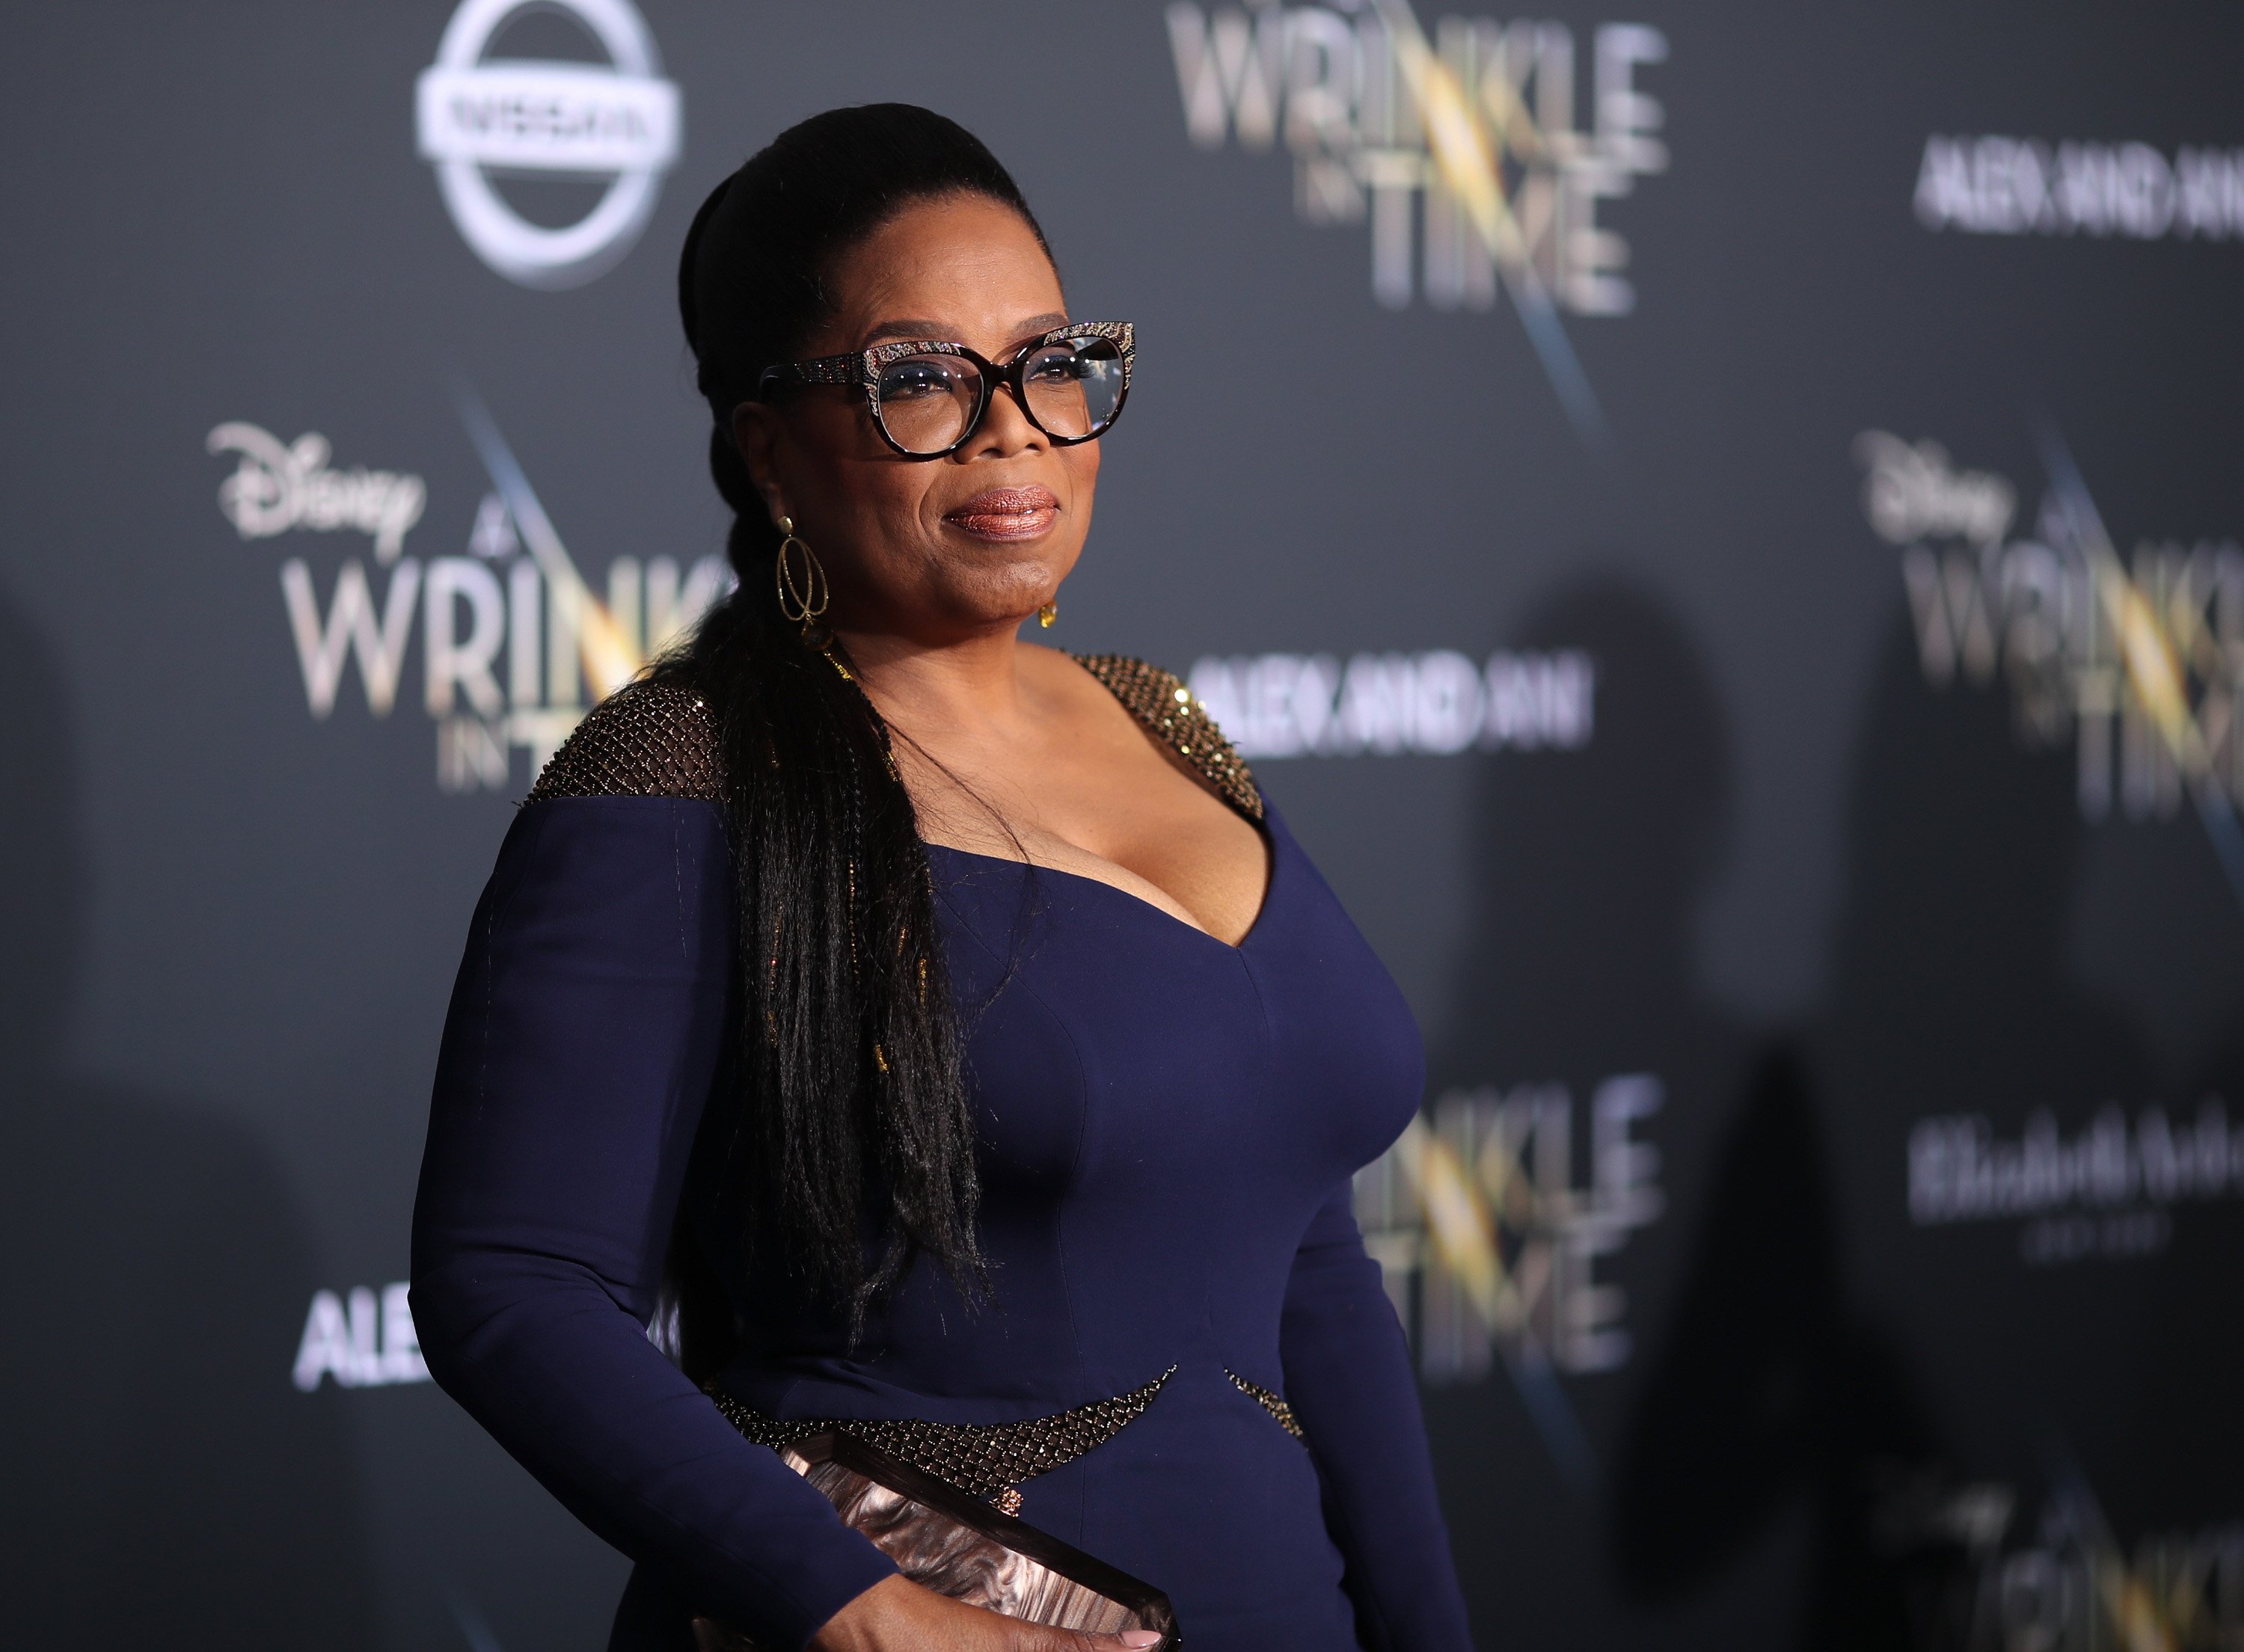 Oprah Winfrey at the premiere of "A Wrinkle in Time" in February 2018. | Photo: Getty Images